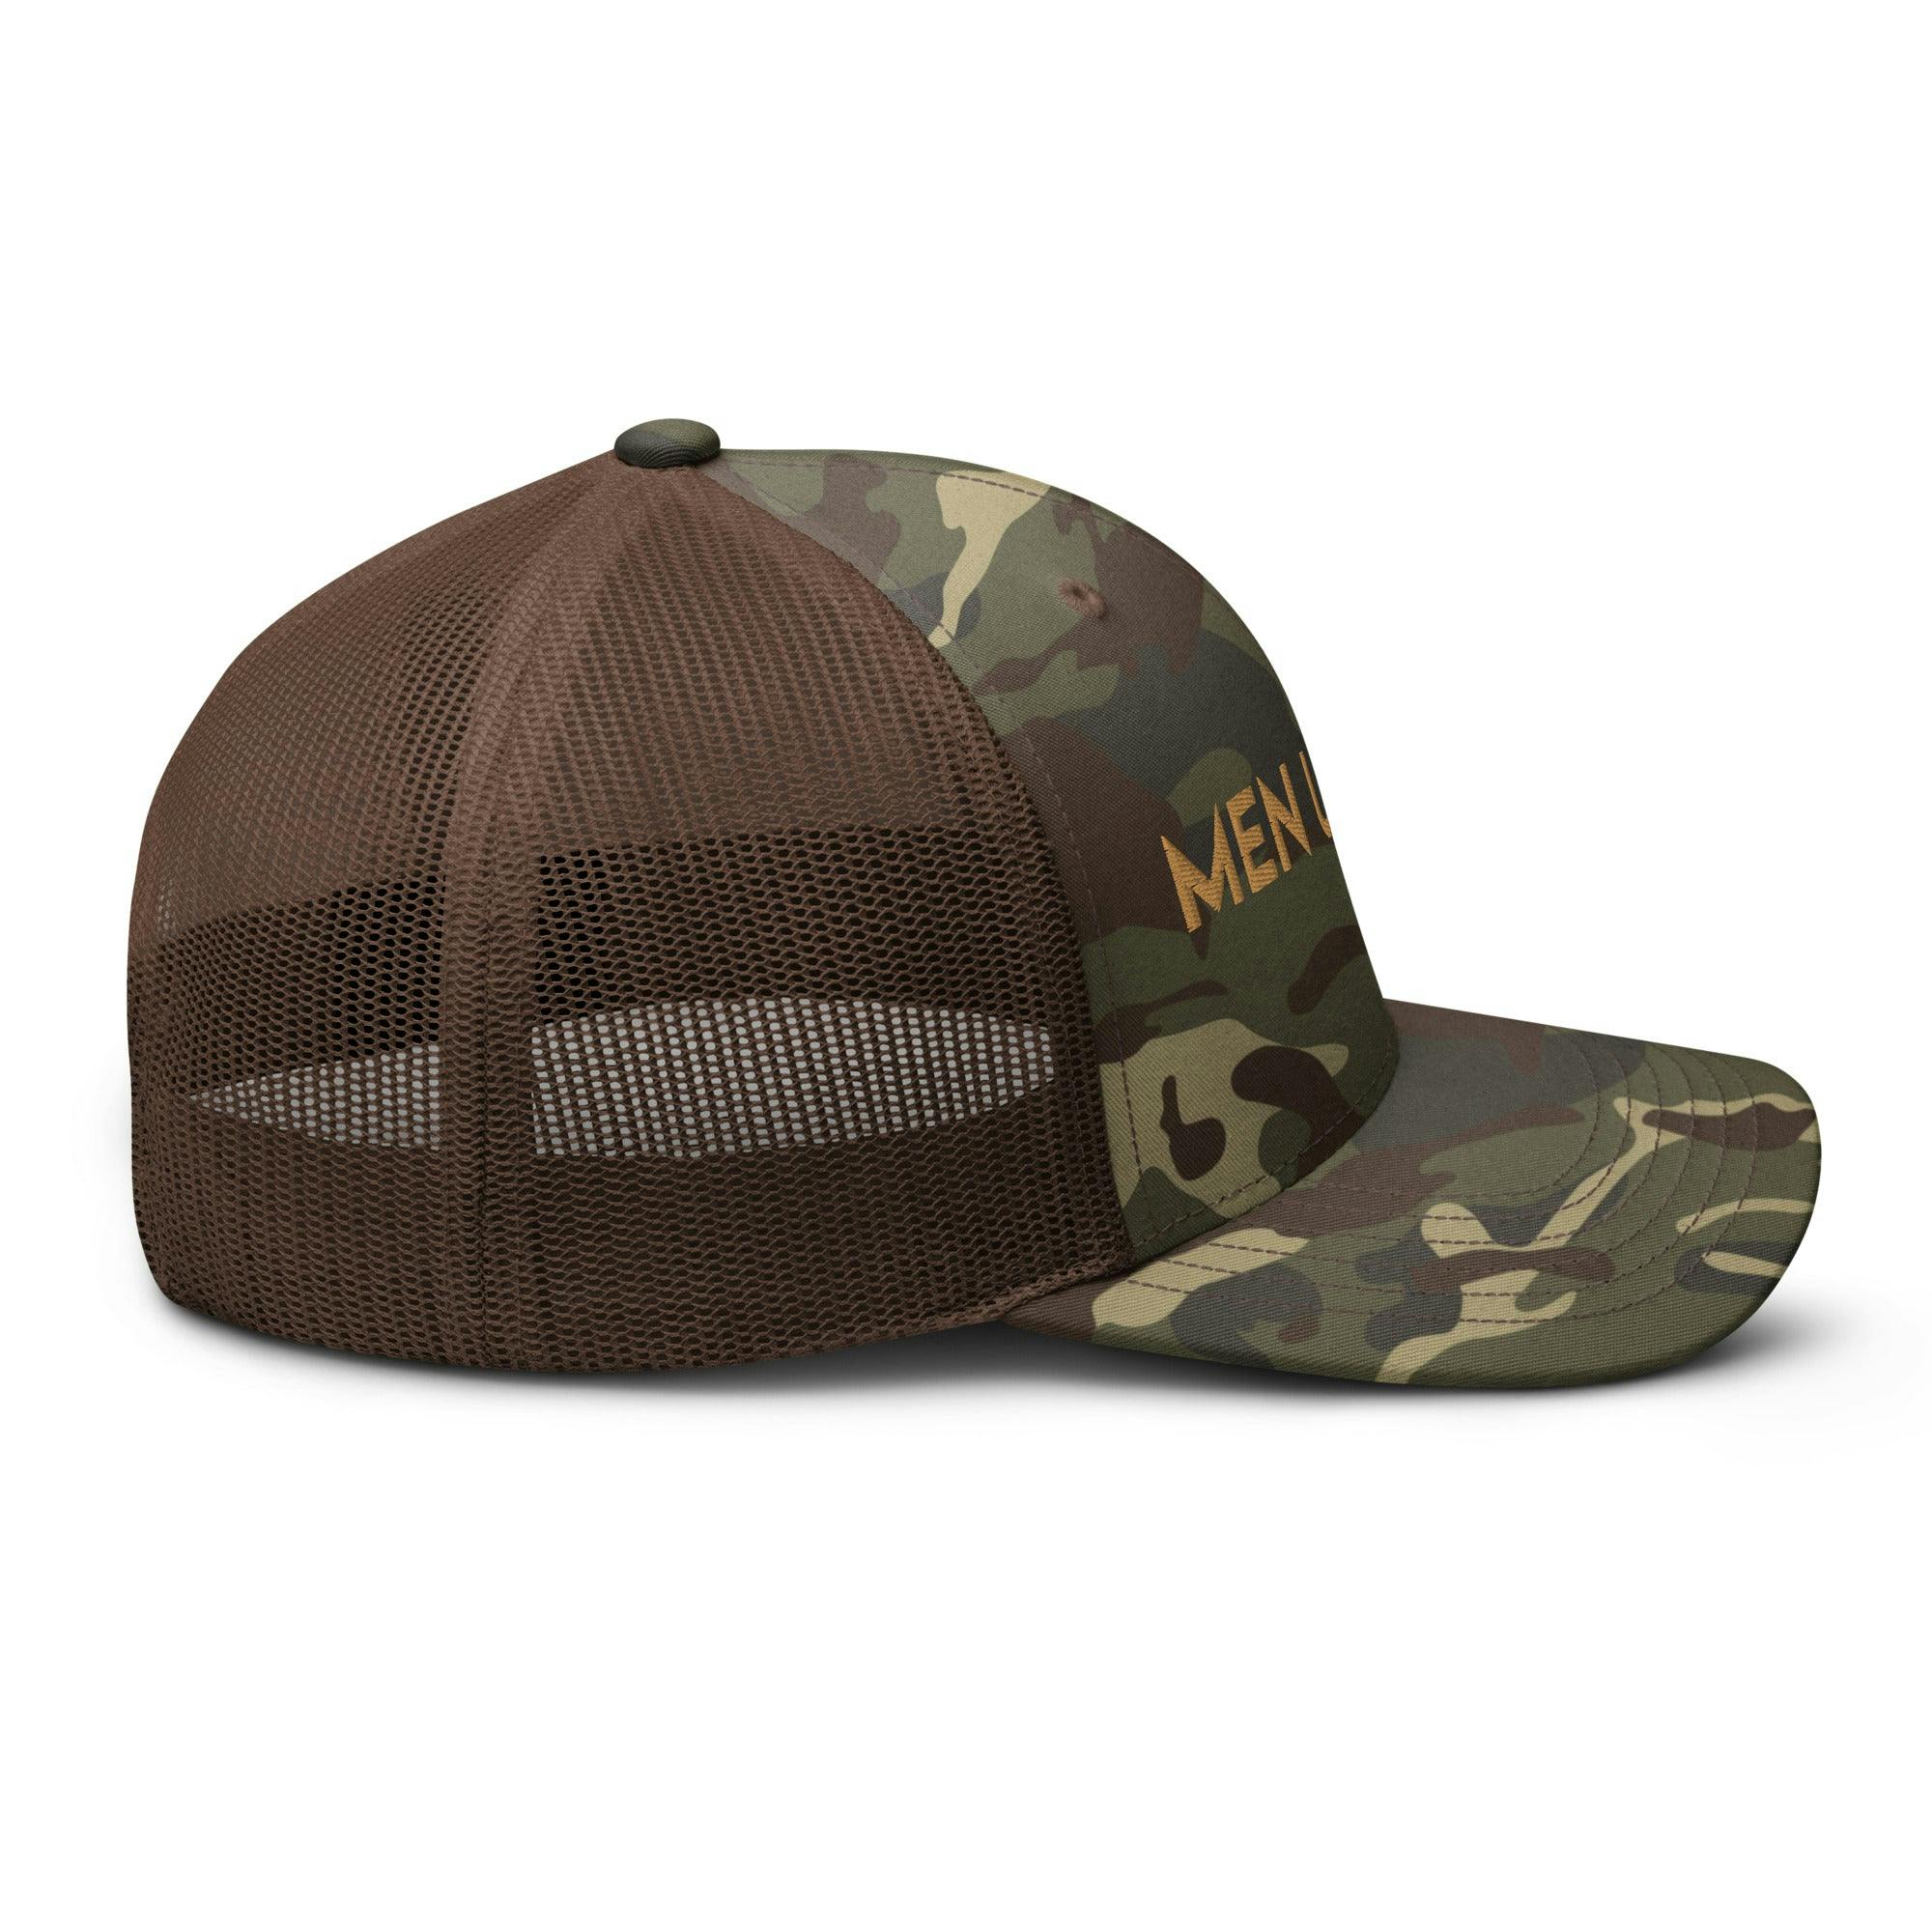 Camouflage trucker hat - camouflage-trucker-hat-camo-brown-right-654a98fba4c55